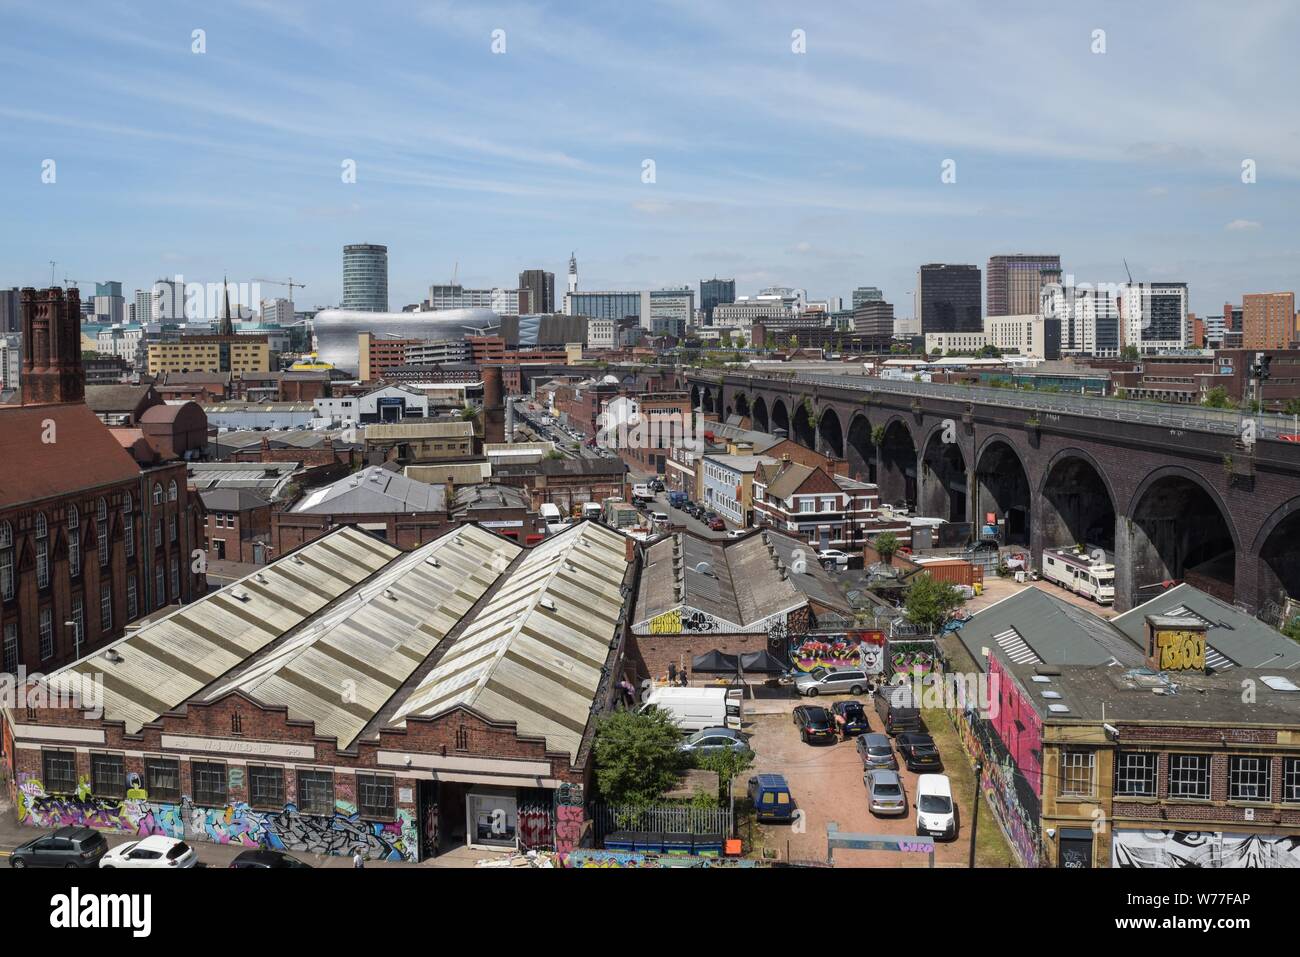 Birmingham, West Midlands, July, 2019. Birmingham City Centre skyline from Digbeth towards the Bullring and the Rotunda. Railway line on the right continues to Moor Street Station which will be linked to HS2. Credit: Sam Holiday/Alamy Live News Stock Photo